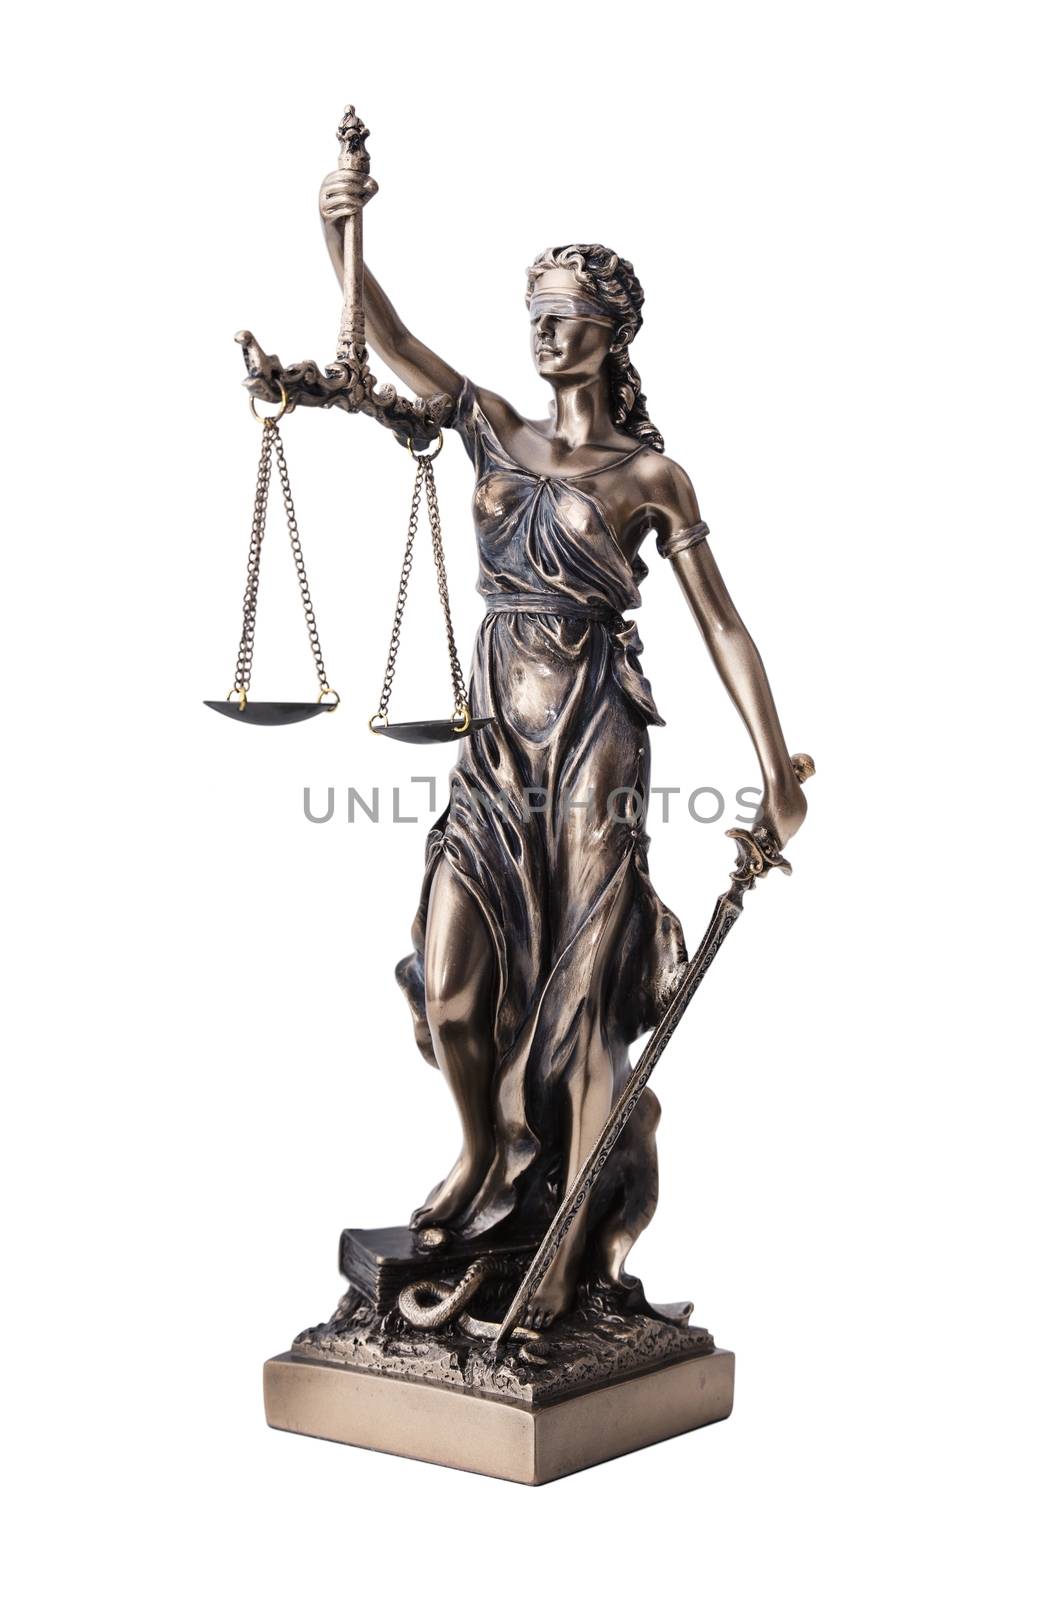 Themis with scale and sword isolated on white. Justice and law symbol statue